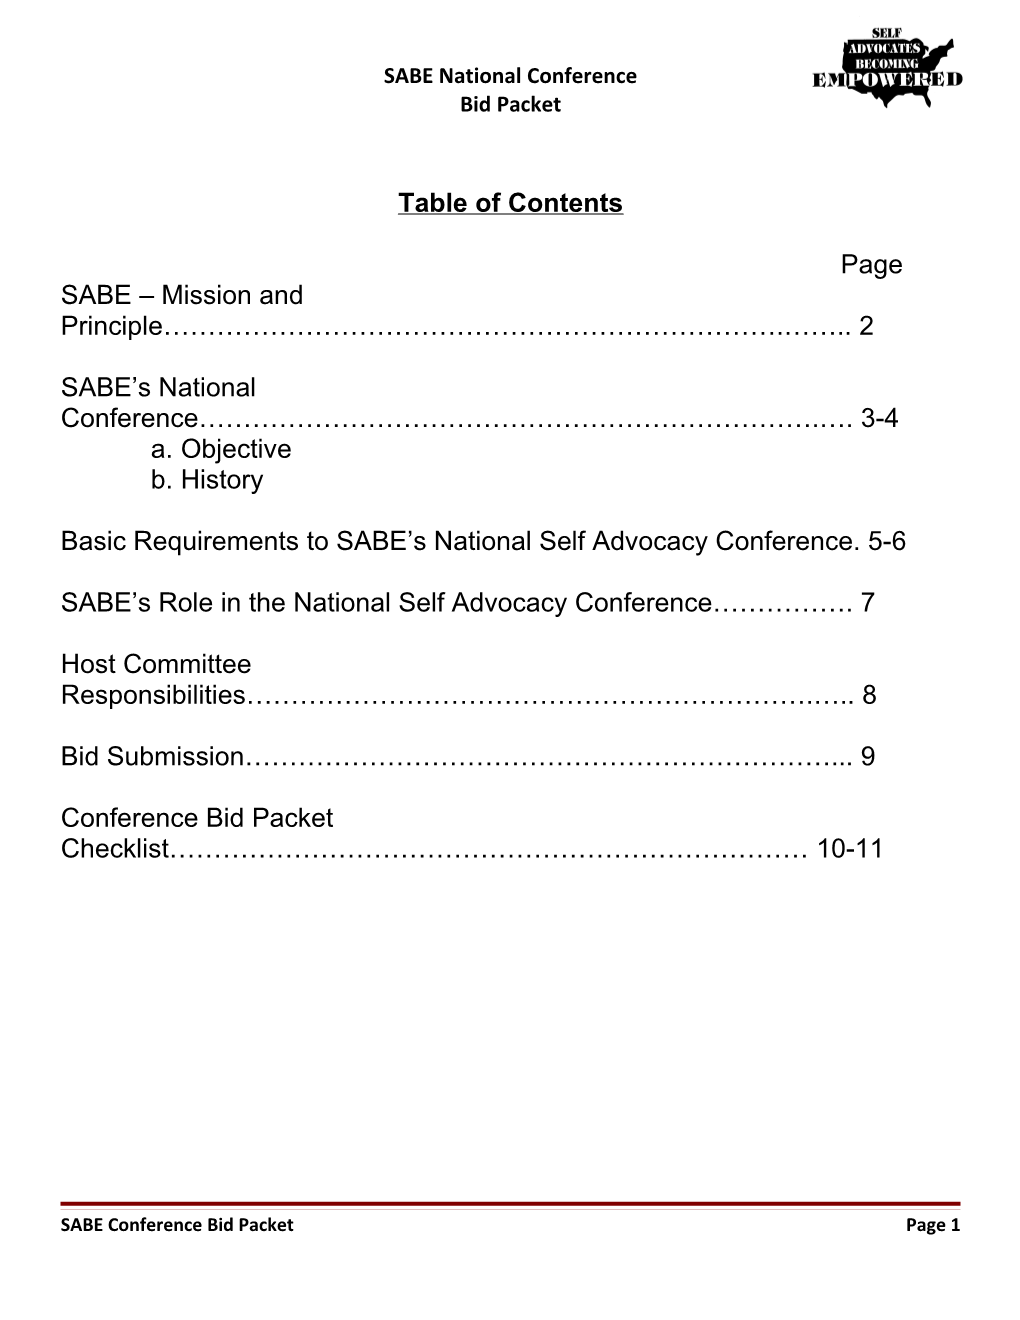 Table of Contents s363